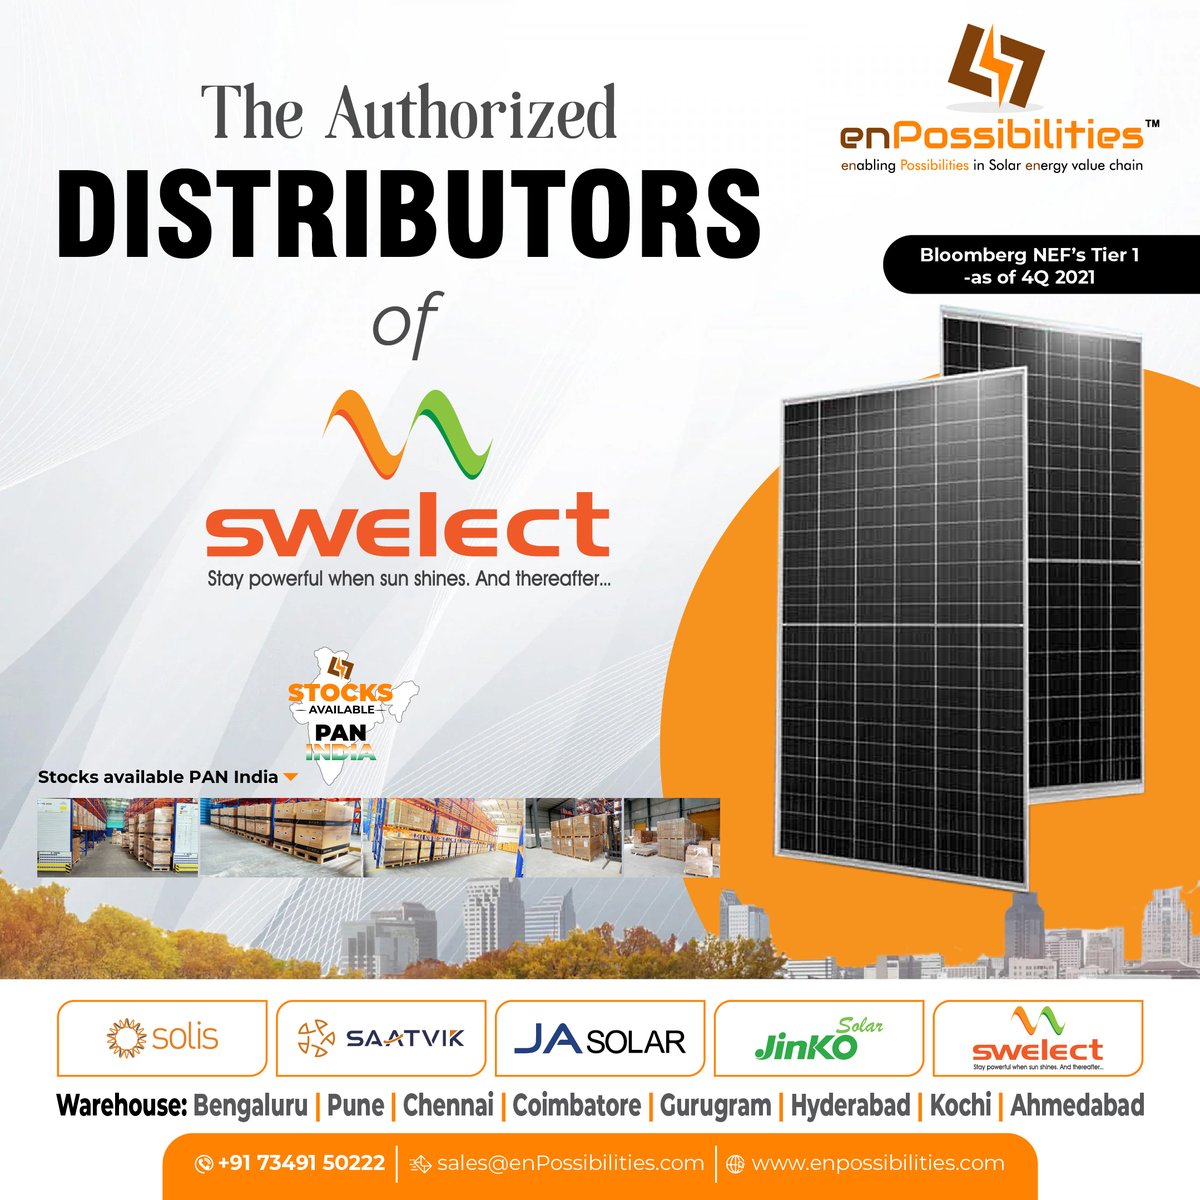 Empowering the Future: enPossibilities, your gateway to renewable energy excellence as the Authorized Distributor of Swelect

#enpossibilities #swelect #distributor #solarpanel